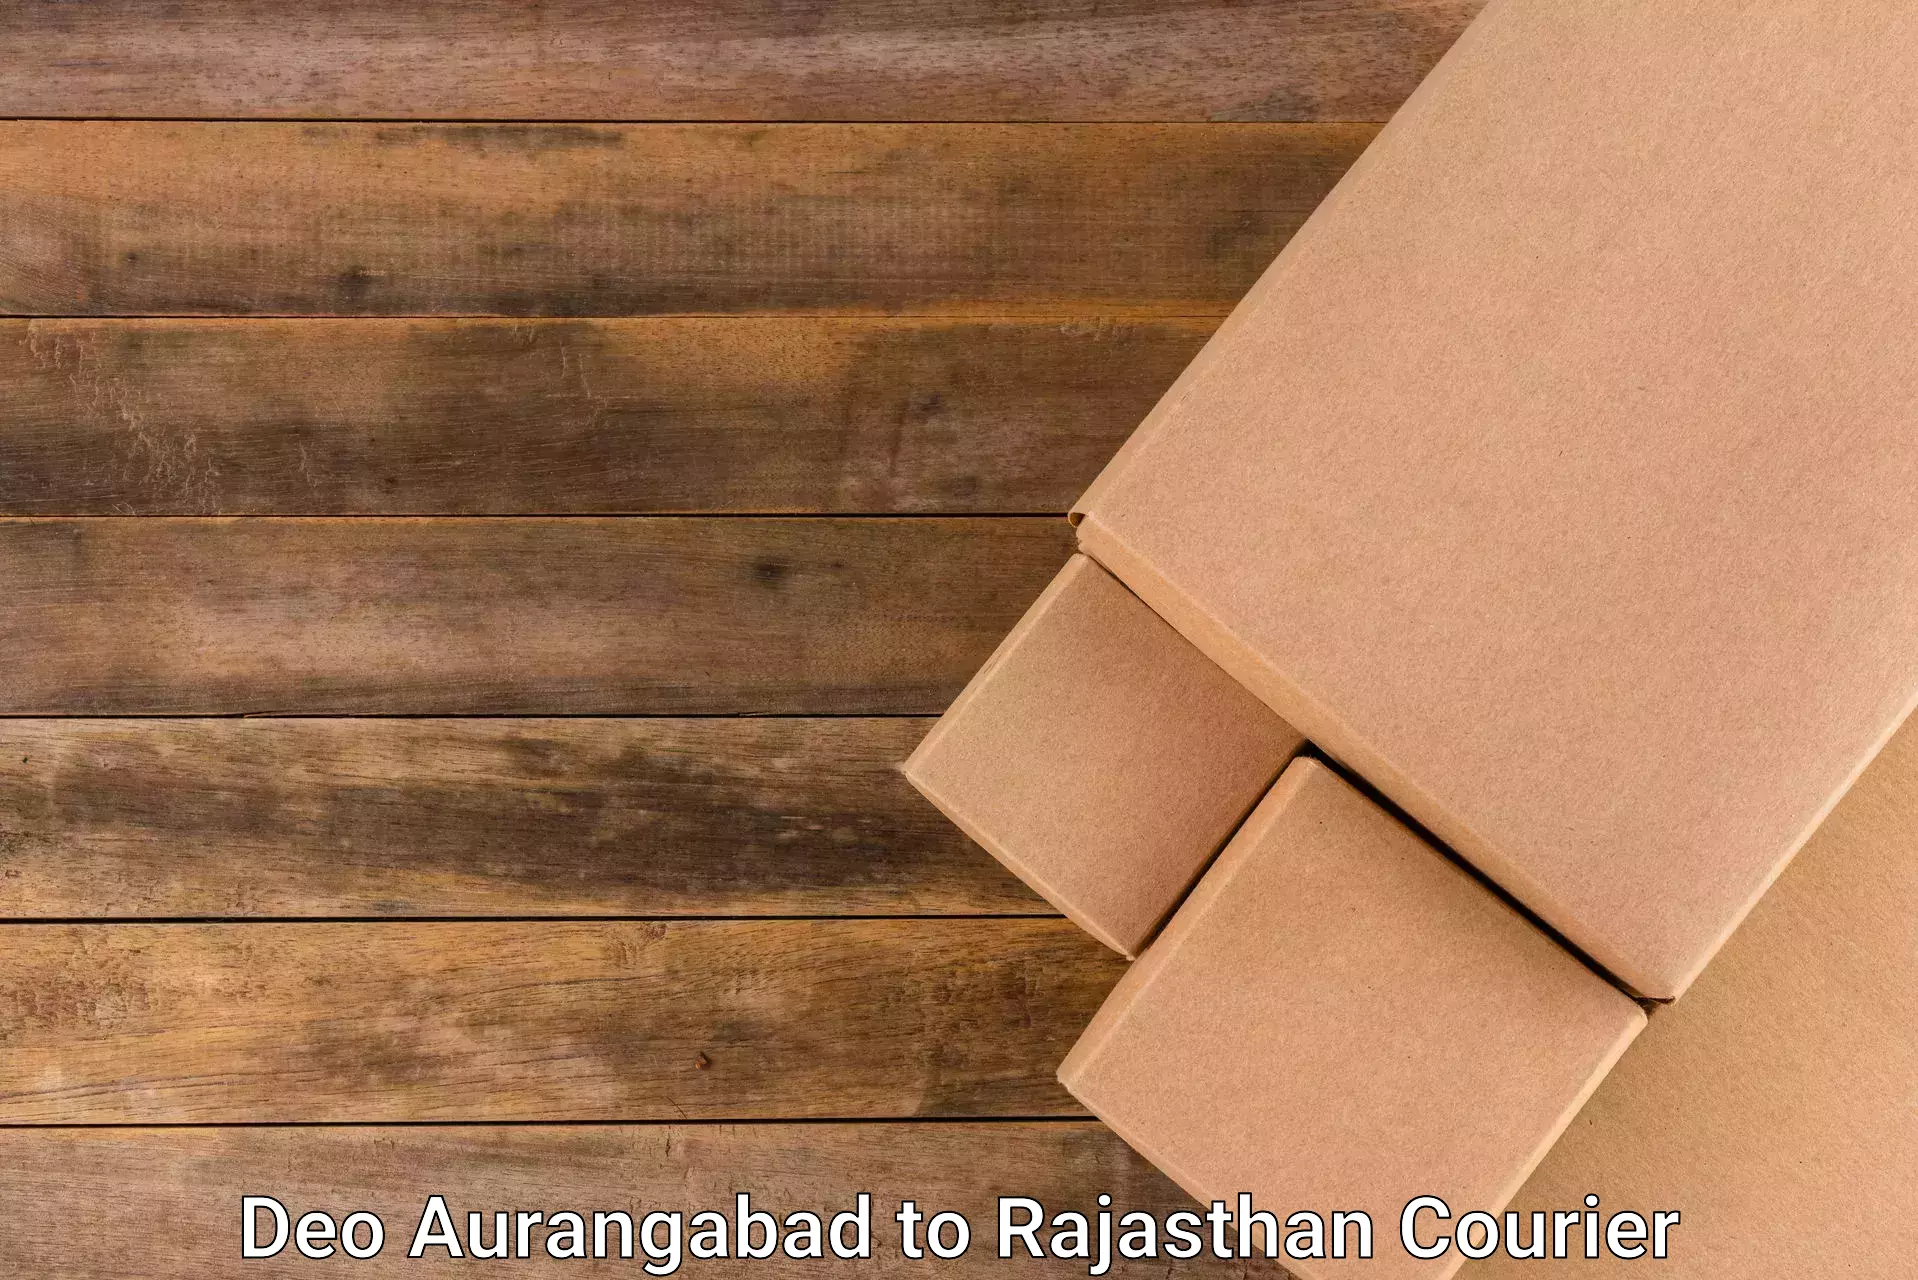 Full-service courier options Deo Aurangabad to Chhabra